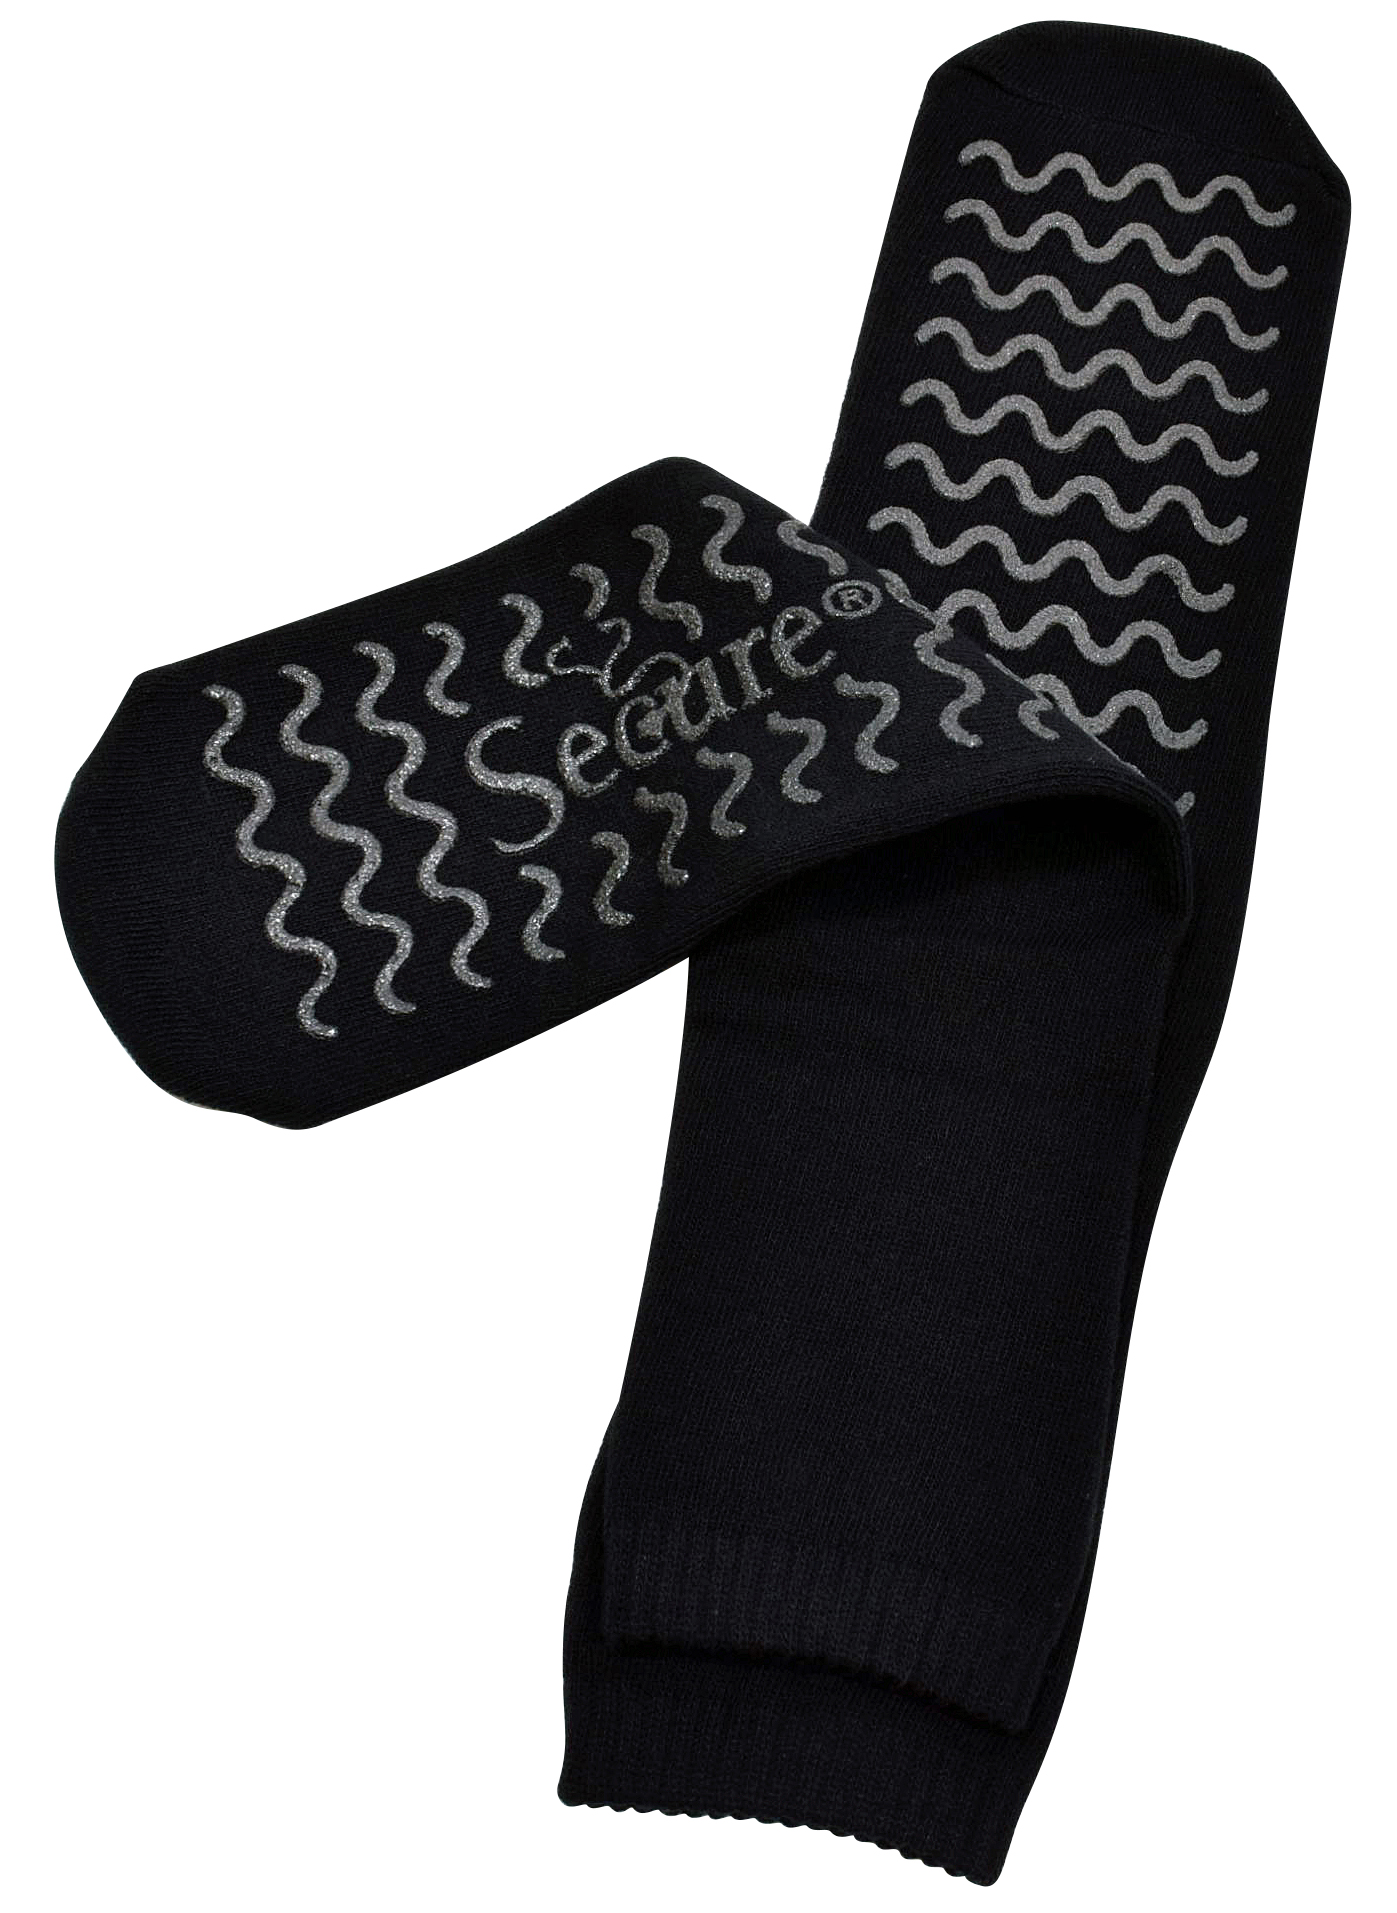 Low Cut Ankle Non Skid Socks-3 pack Adaptive Clothing for Seniors, Disabled  & Elderly Care